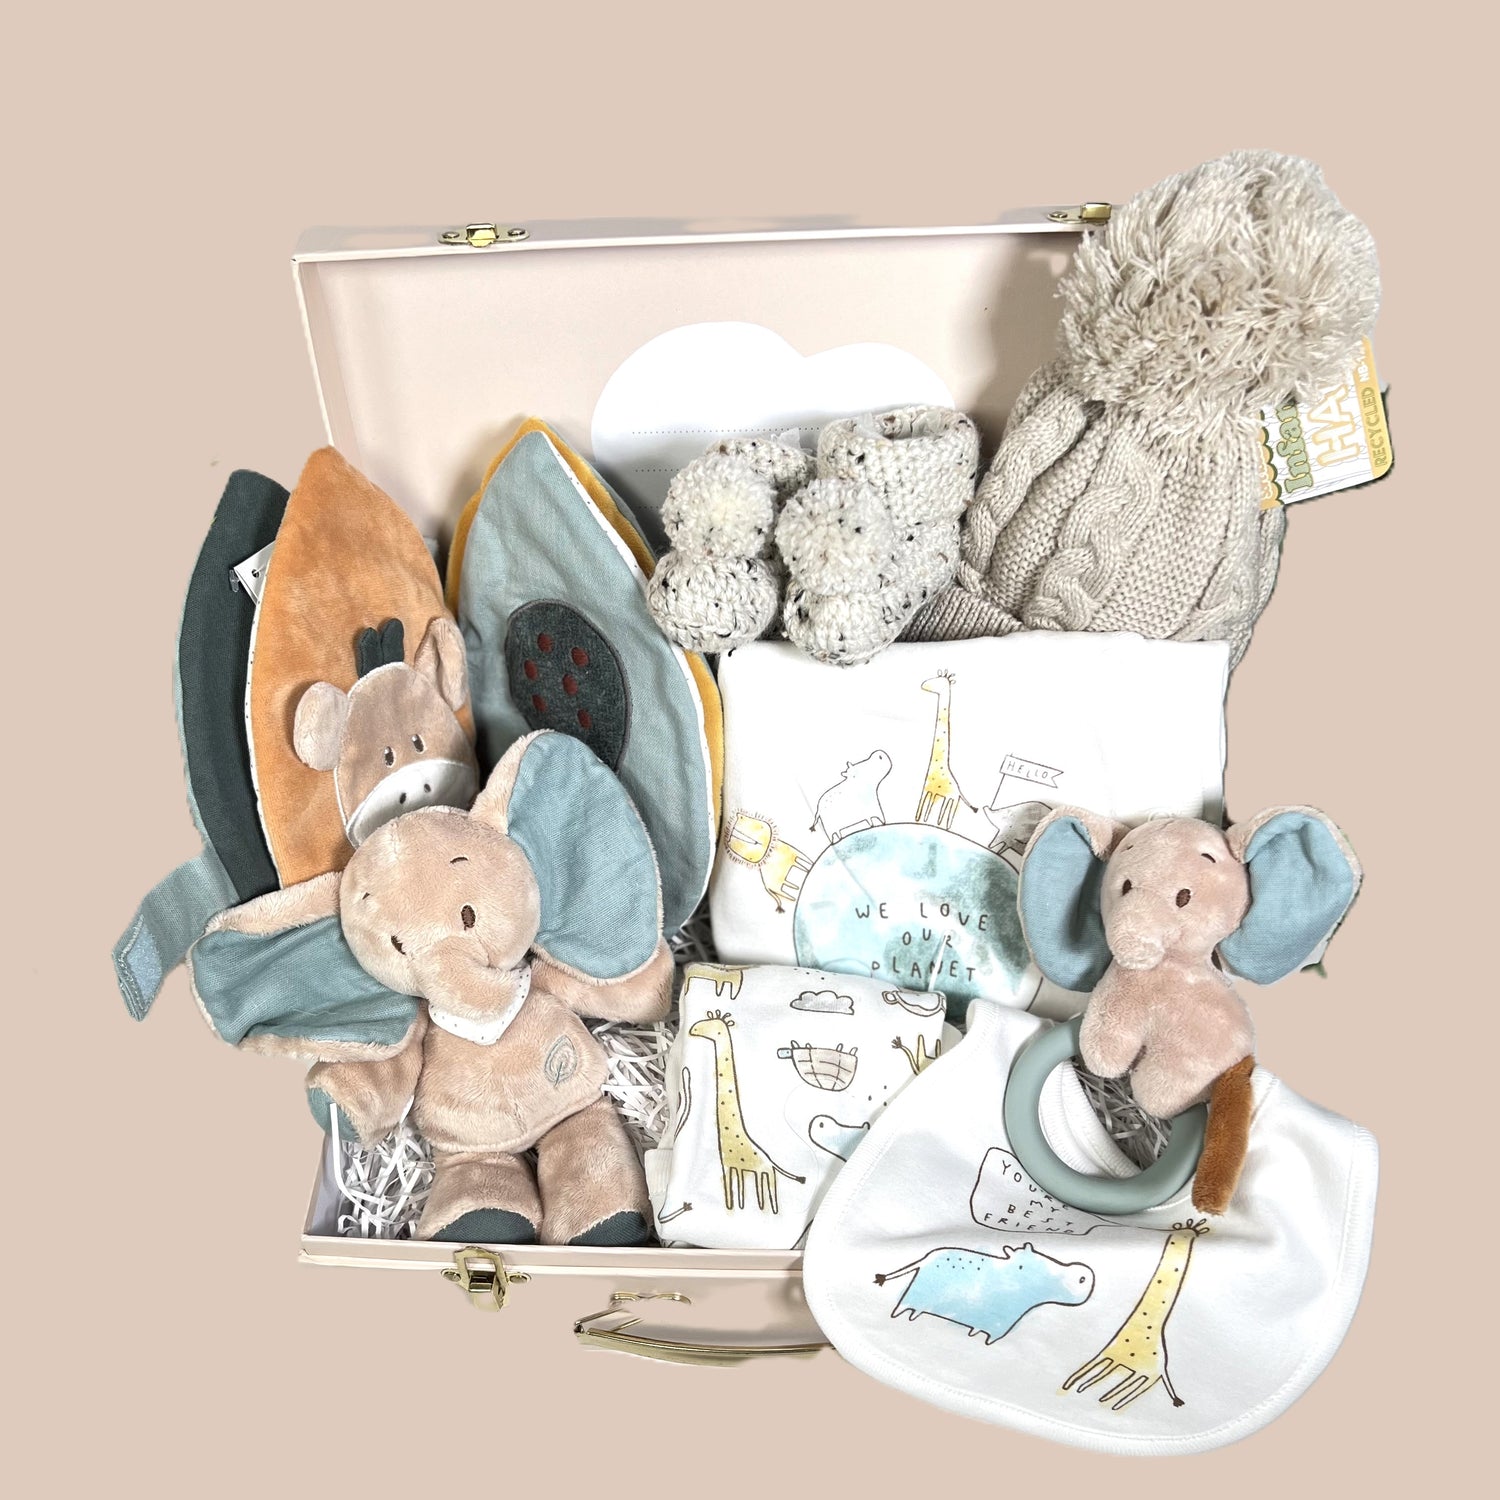 Luxury unisex new parents hamper gift containg a white Hippychick Cellular cotton baby balnlet, an organic cotton layette set "We love our planet", a pair of chrocheted baby booties with pom poms and a Nattou sensory fabric baby book.